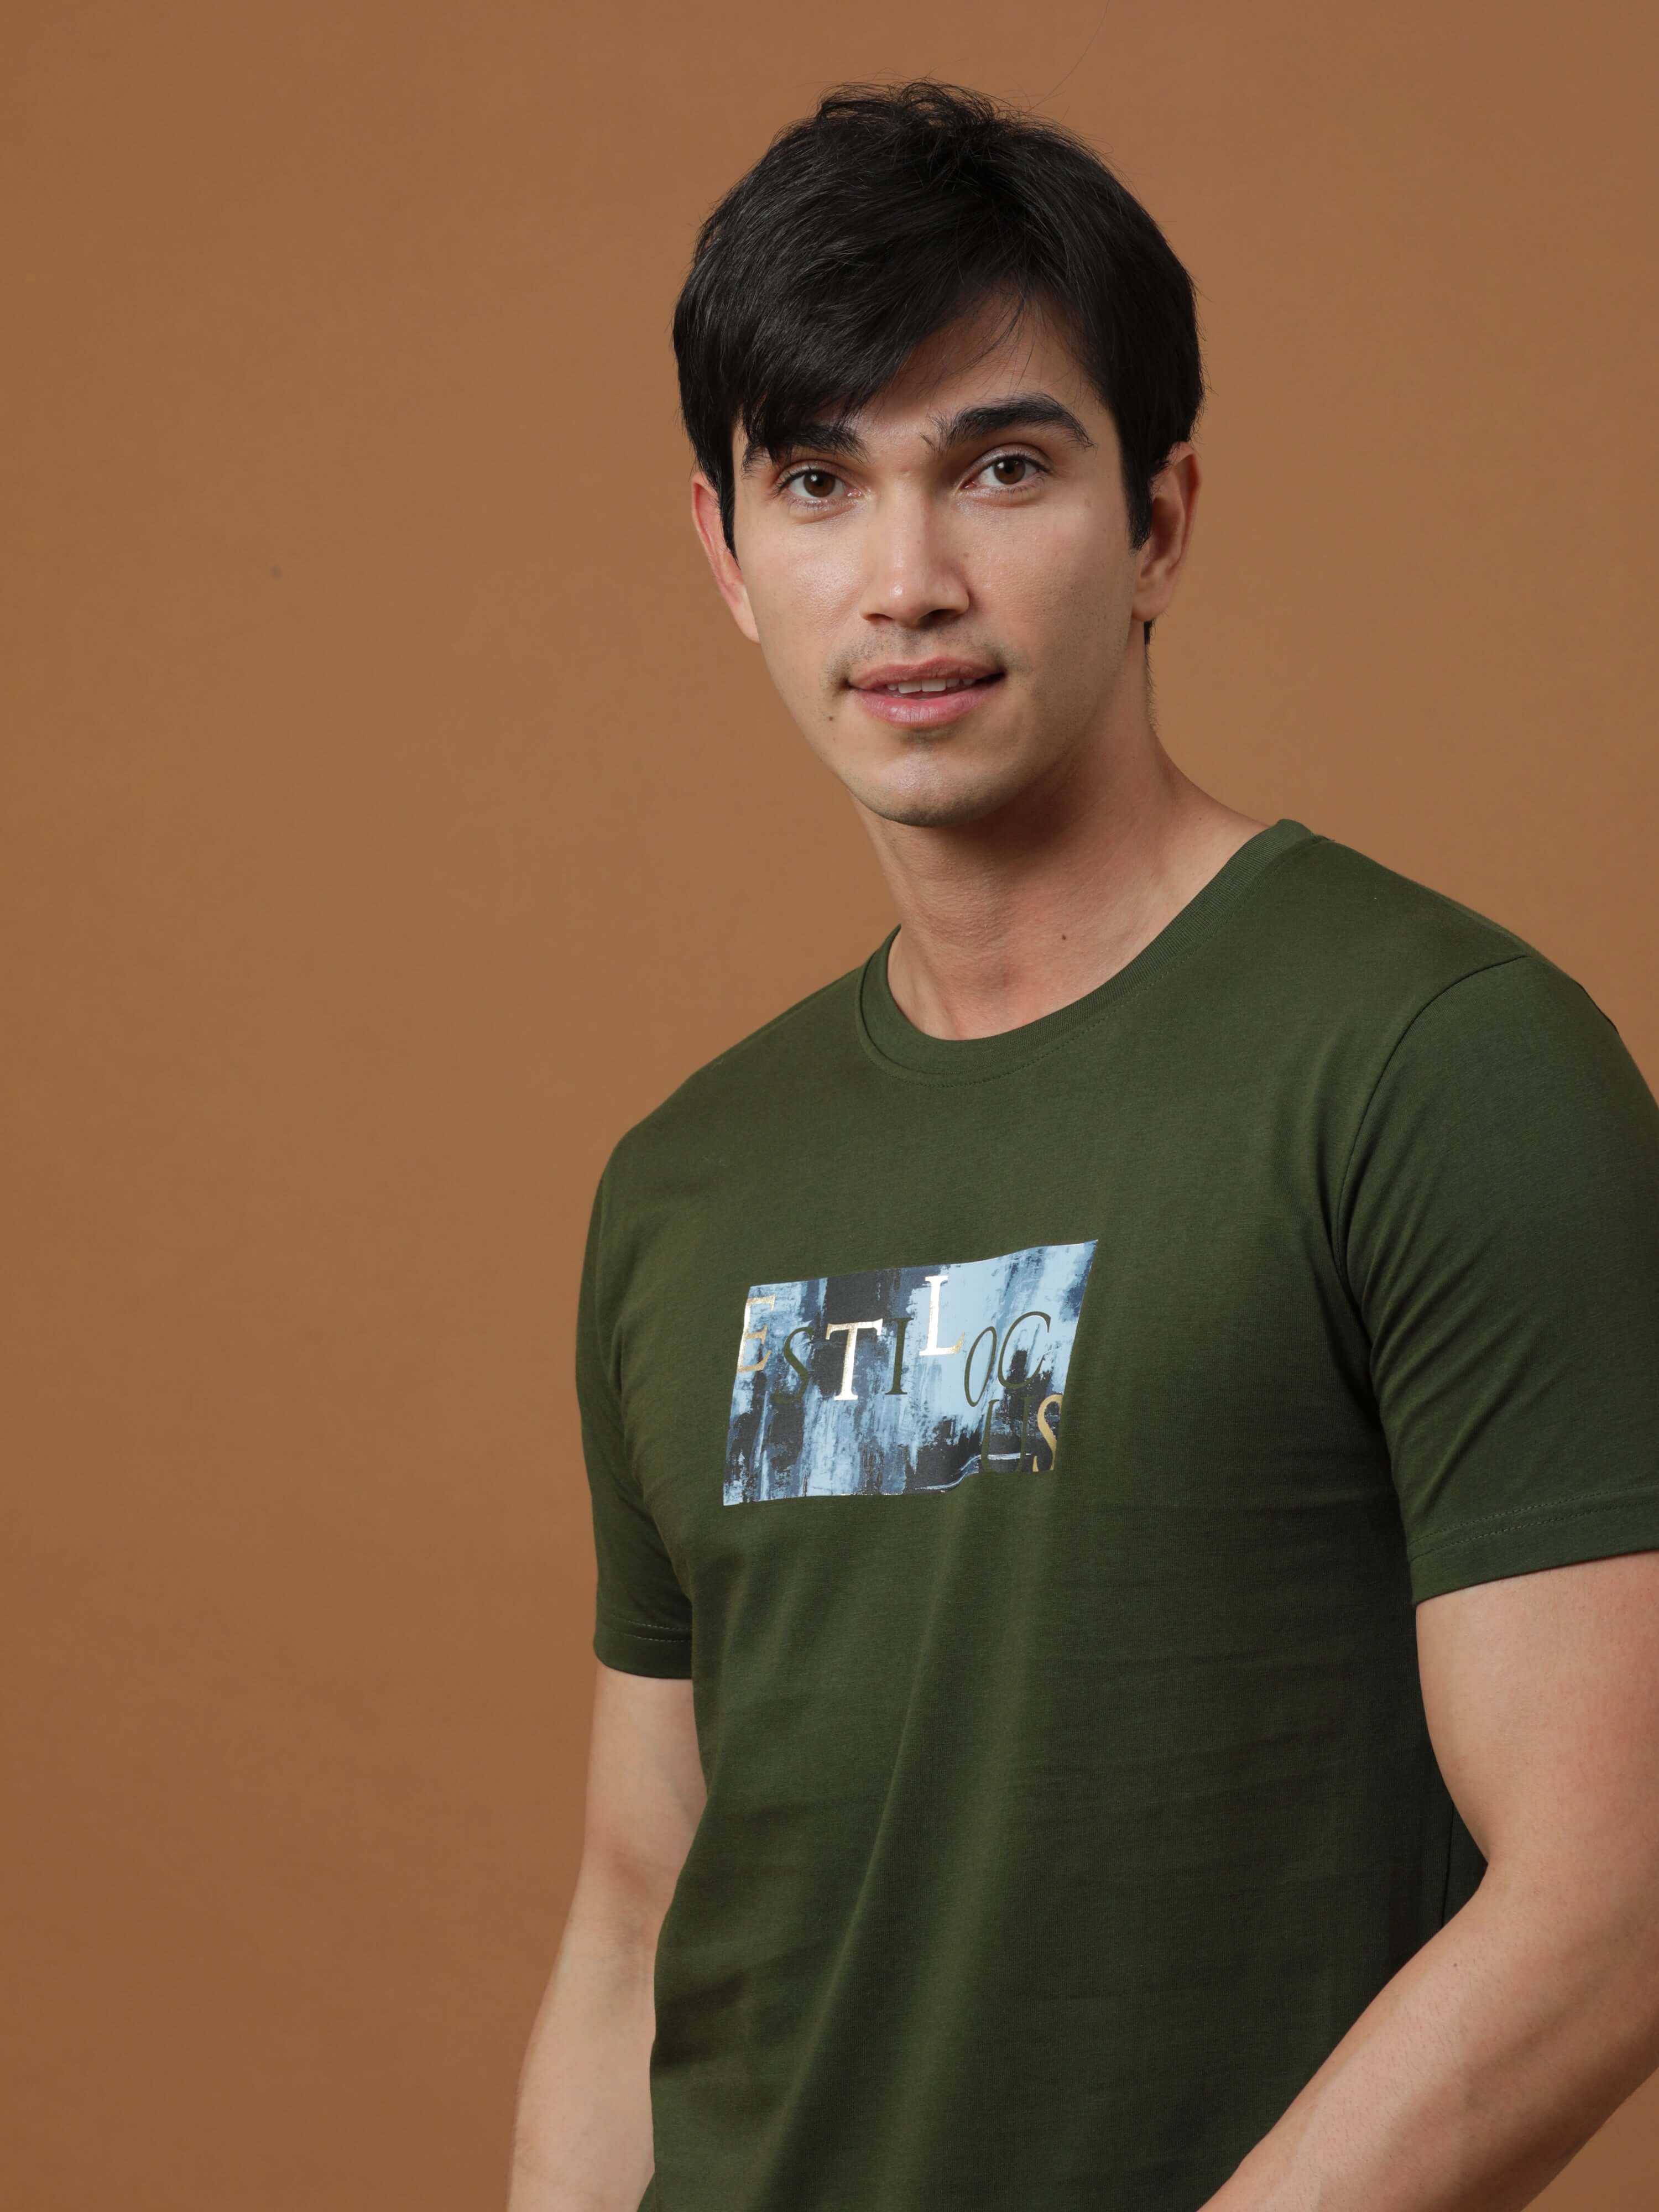 Vintage Dk Olive Printed T Shirt shop online at Estilocus. 100% Cotton Designed and printed on knitted fabric. The fabric is stretchy and lightweight, with a soft skin feel and no wrinkles. Crew neck collar which is smooth on the neck and keeps you comfor